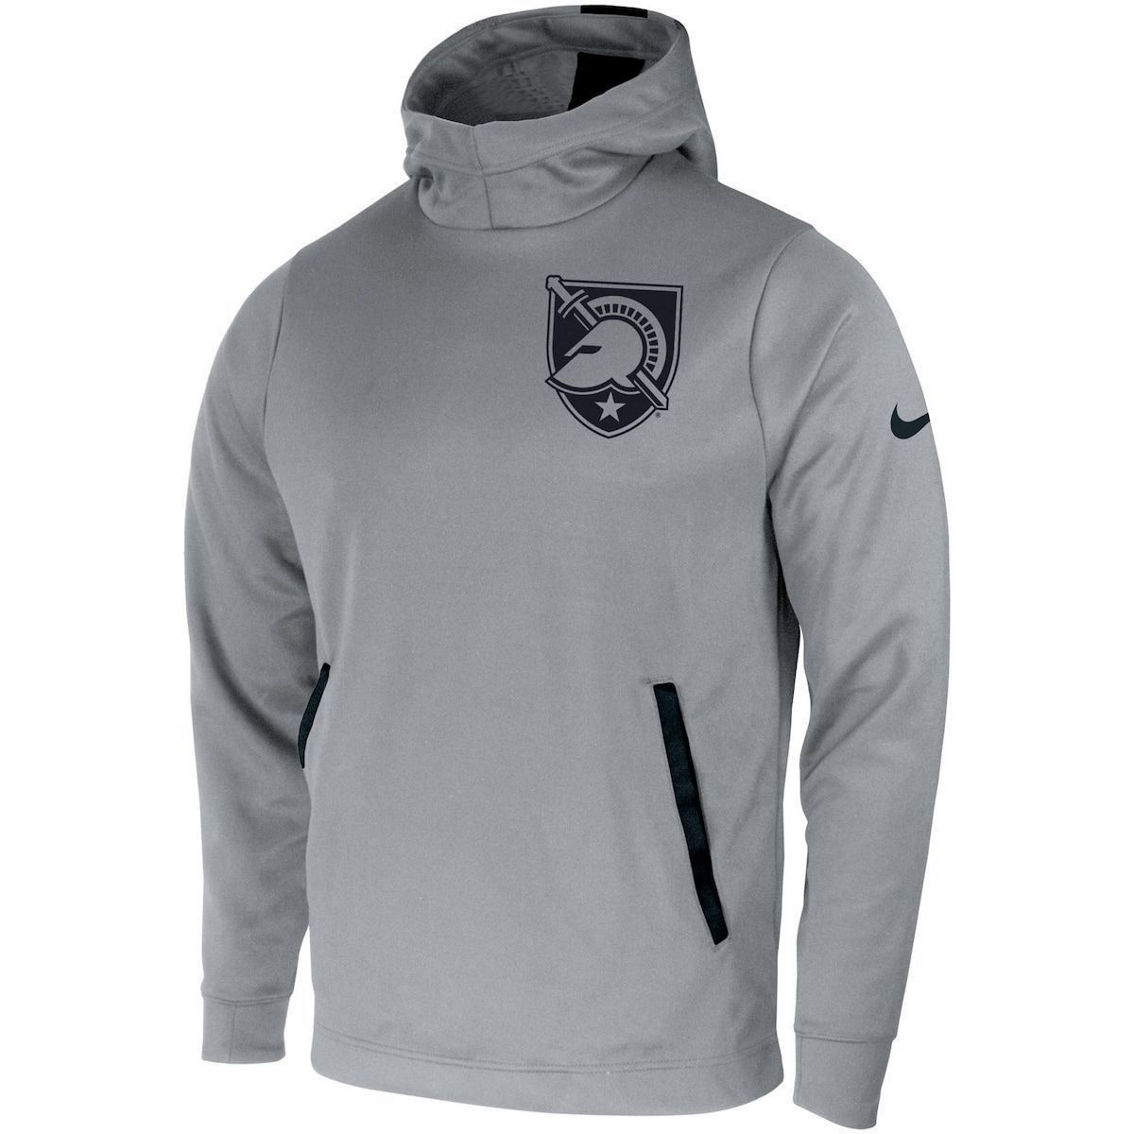 Nike Men's Gray Army Black Knights 2-Hit Performance Pullover Hoodie - Image 3 of 4